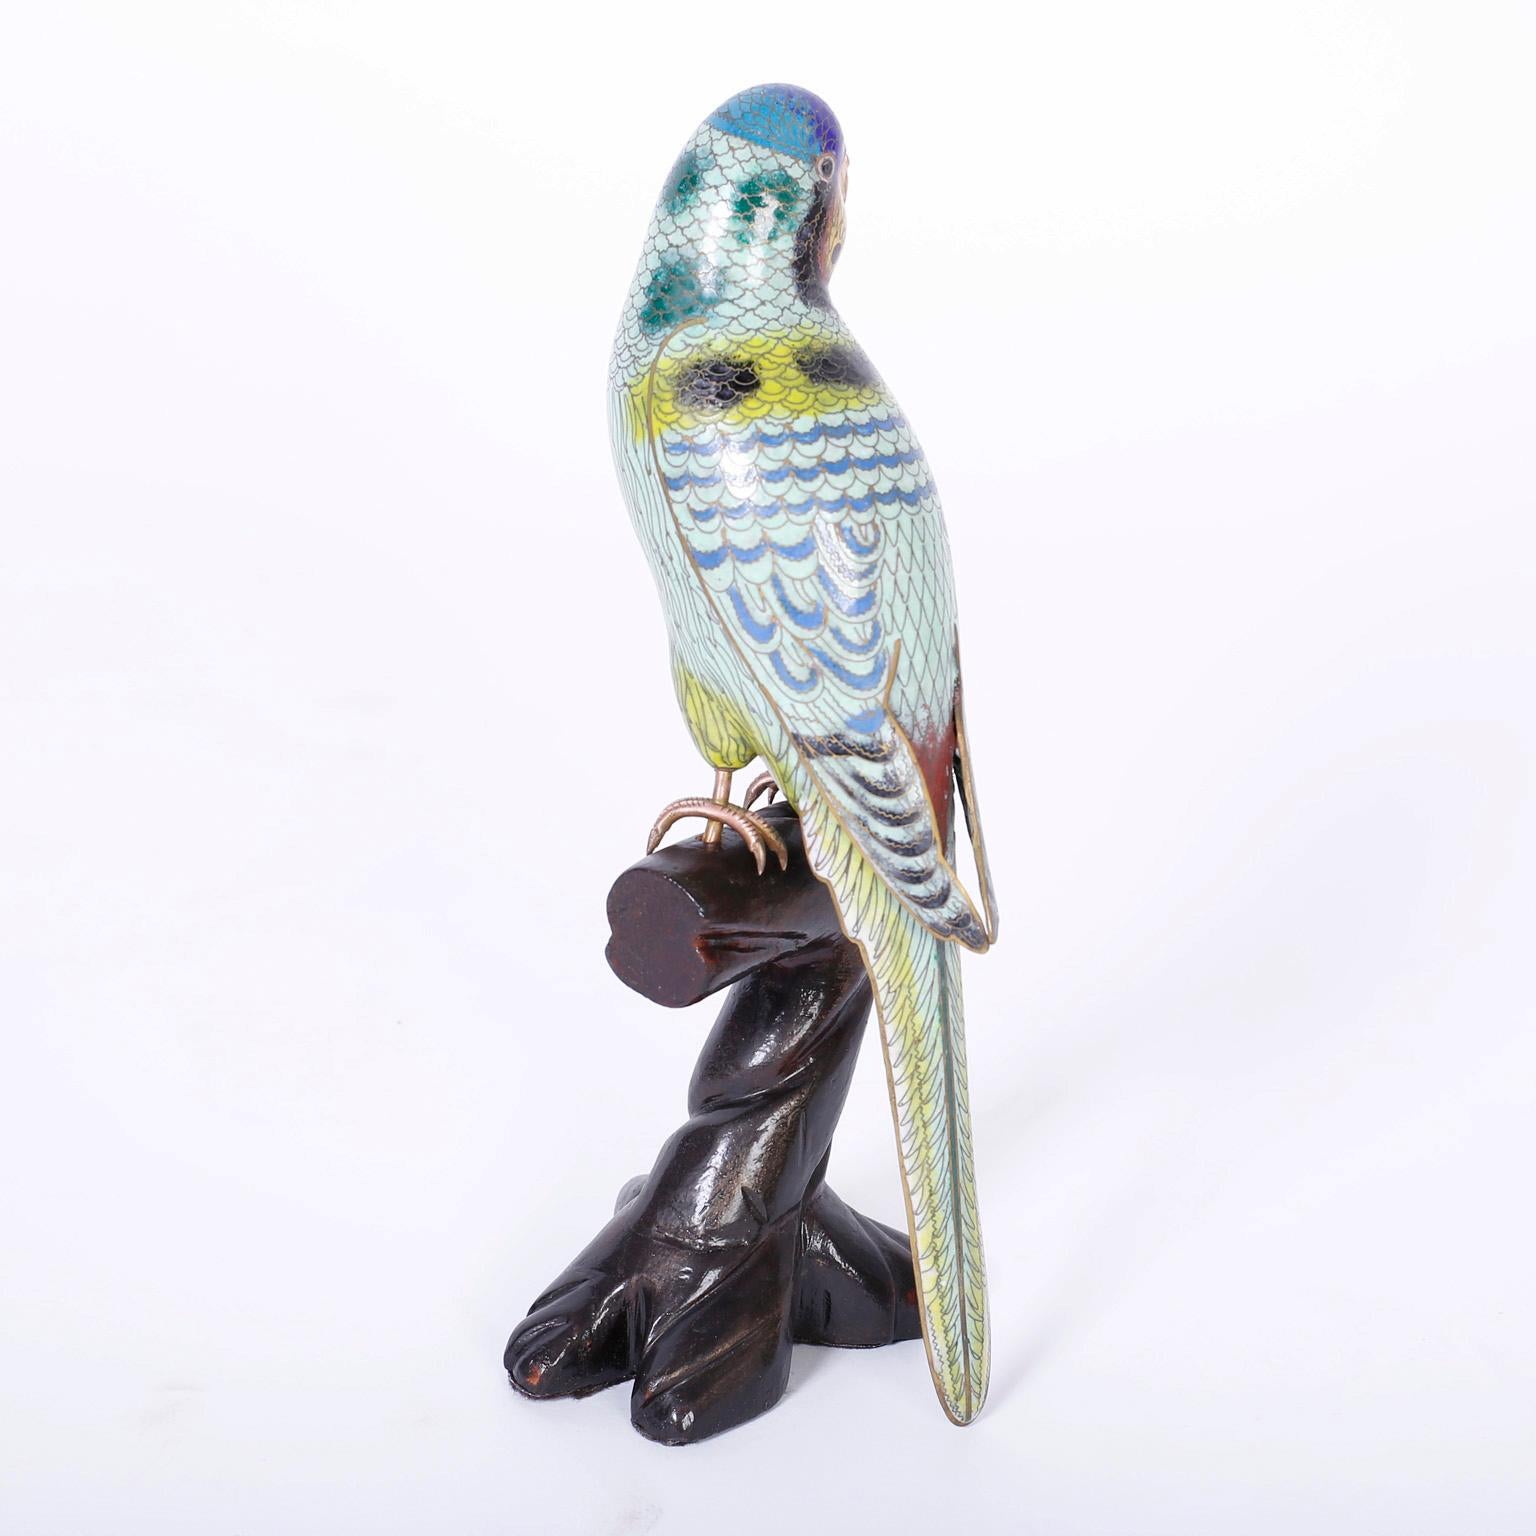 20th Century Pair of Chinese Cloisonné Birds or Parrots